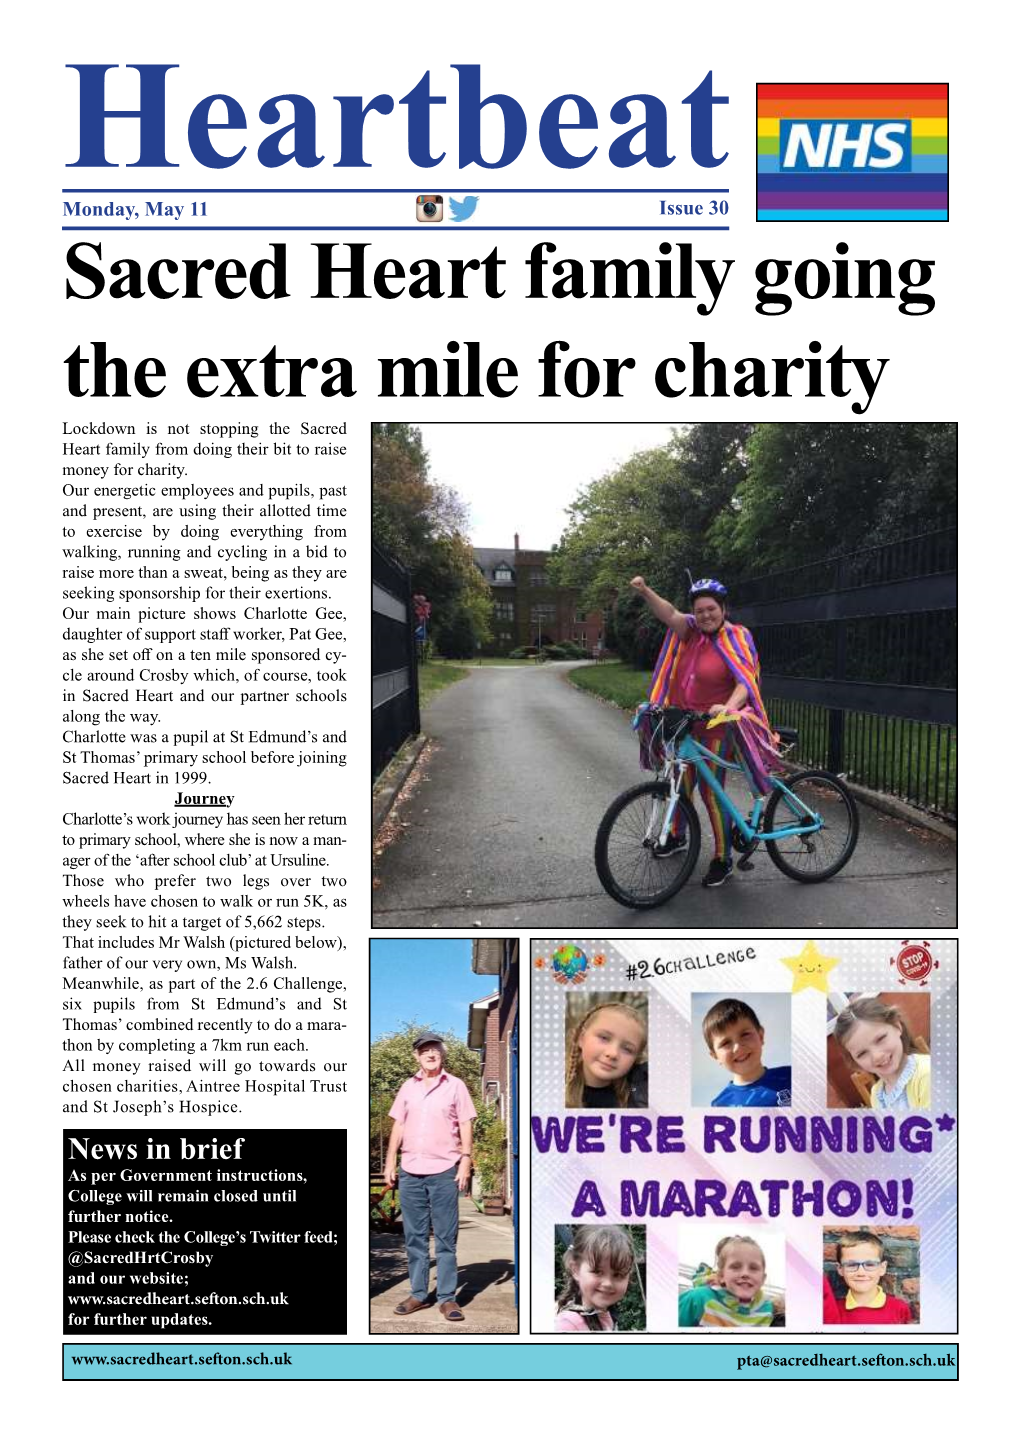 Sacred Heart Family Going the Extra Mile for Charity Lockdown Is Not Stopping the Sacred Heart Family from Doing Their Bit to Raise Money for Charity